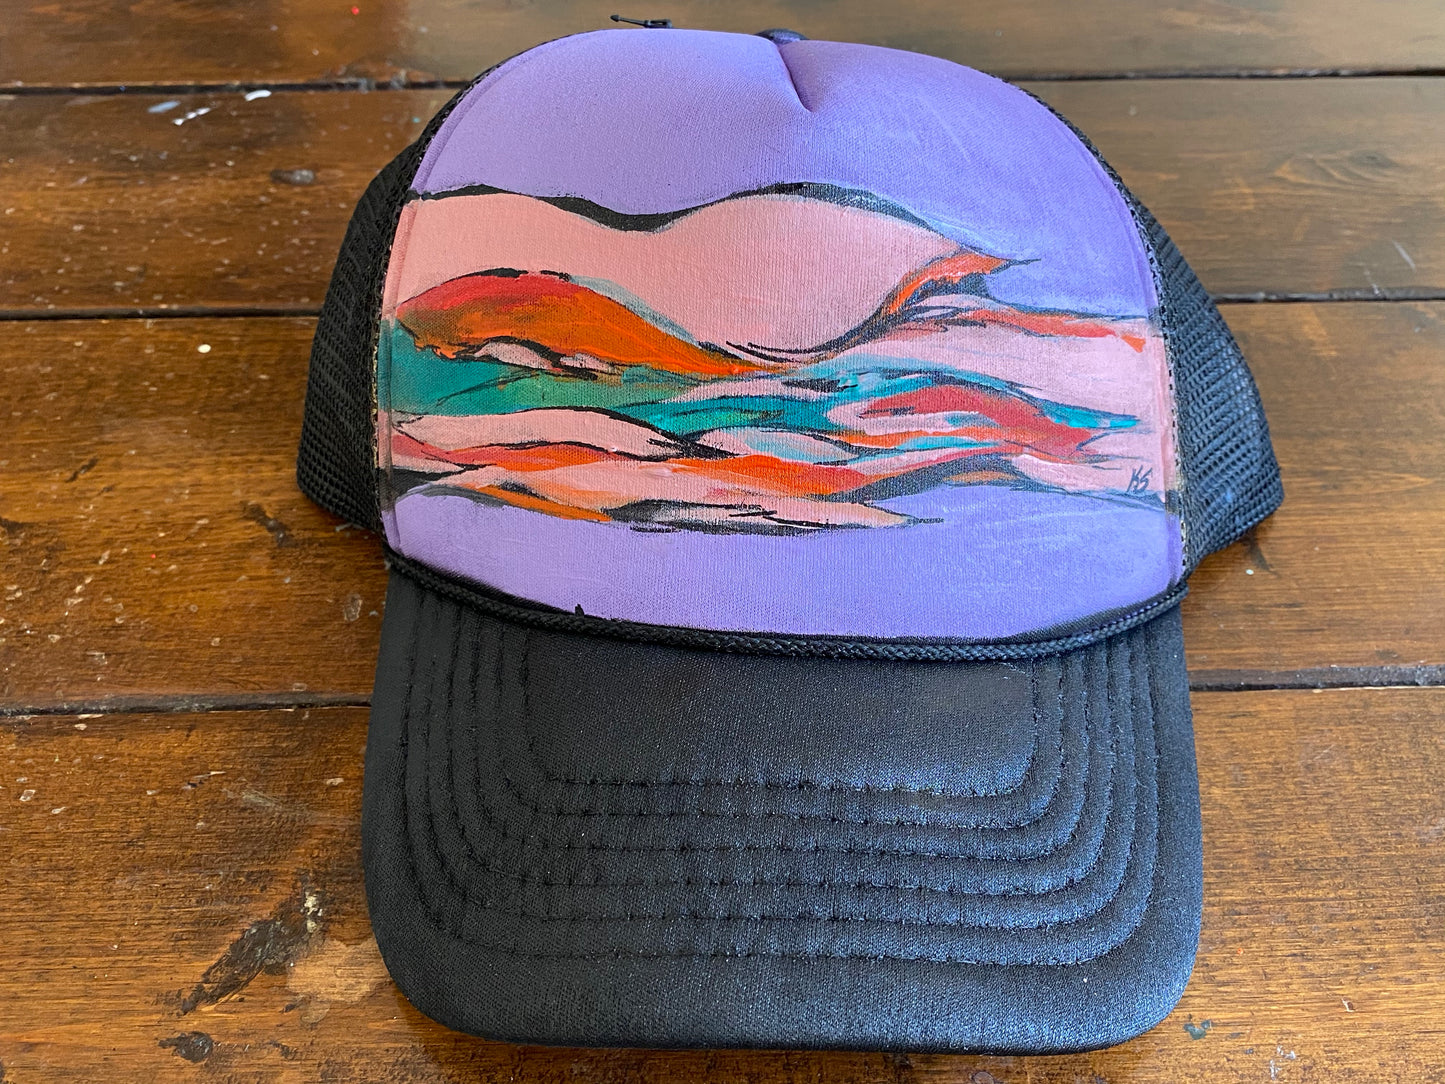 "Carried onto Completion" Adjustable trucker